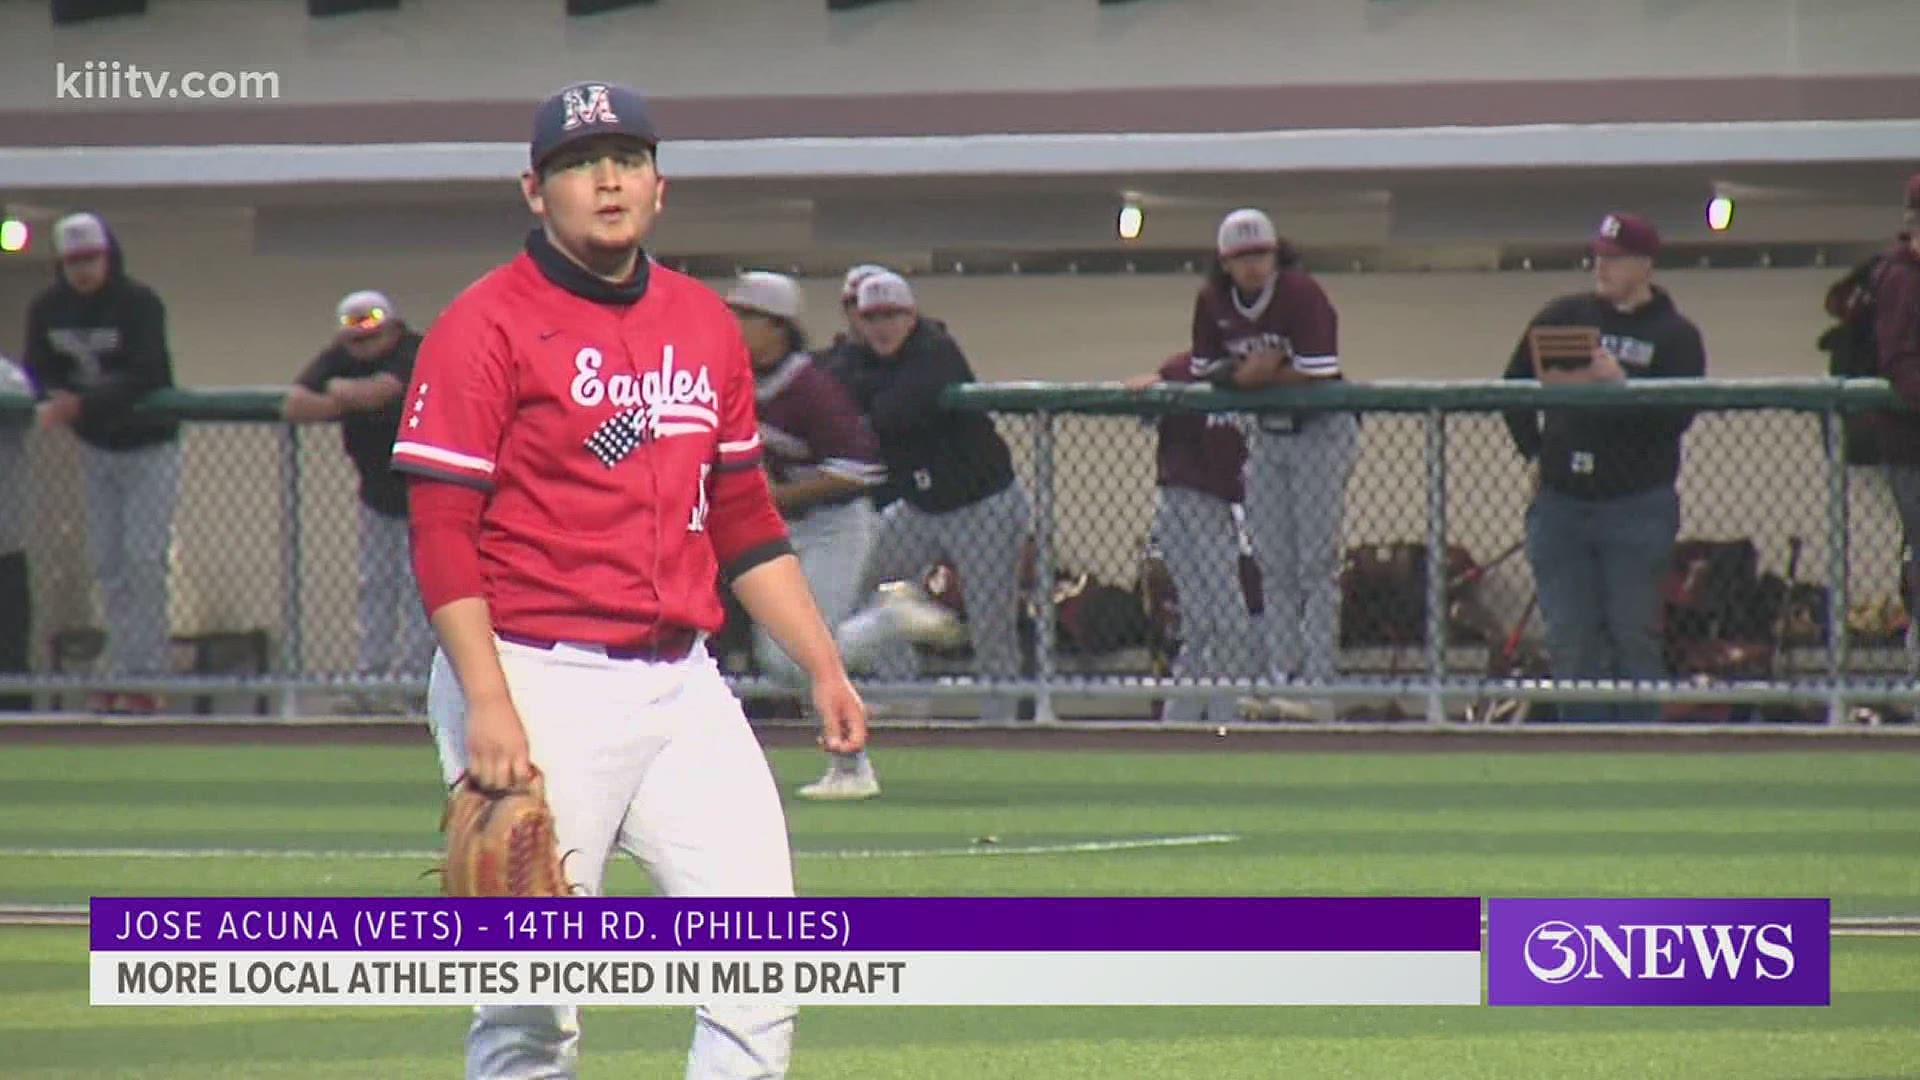 Veterans Memorial grad Jose Acuna was drafted by the Phillies in the 14th round while former OG Bulldog and Islander Drake Osborn was selected by the Mets (19th rd).